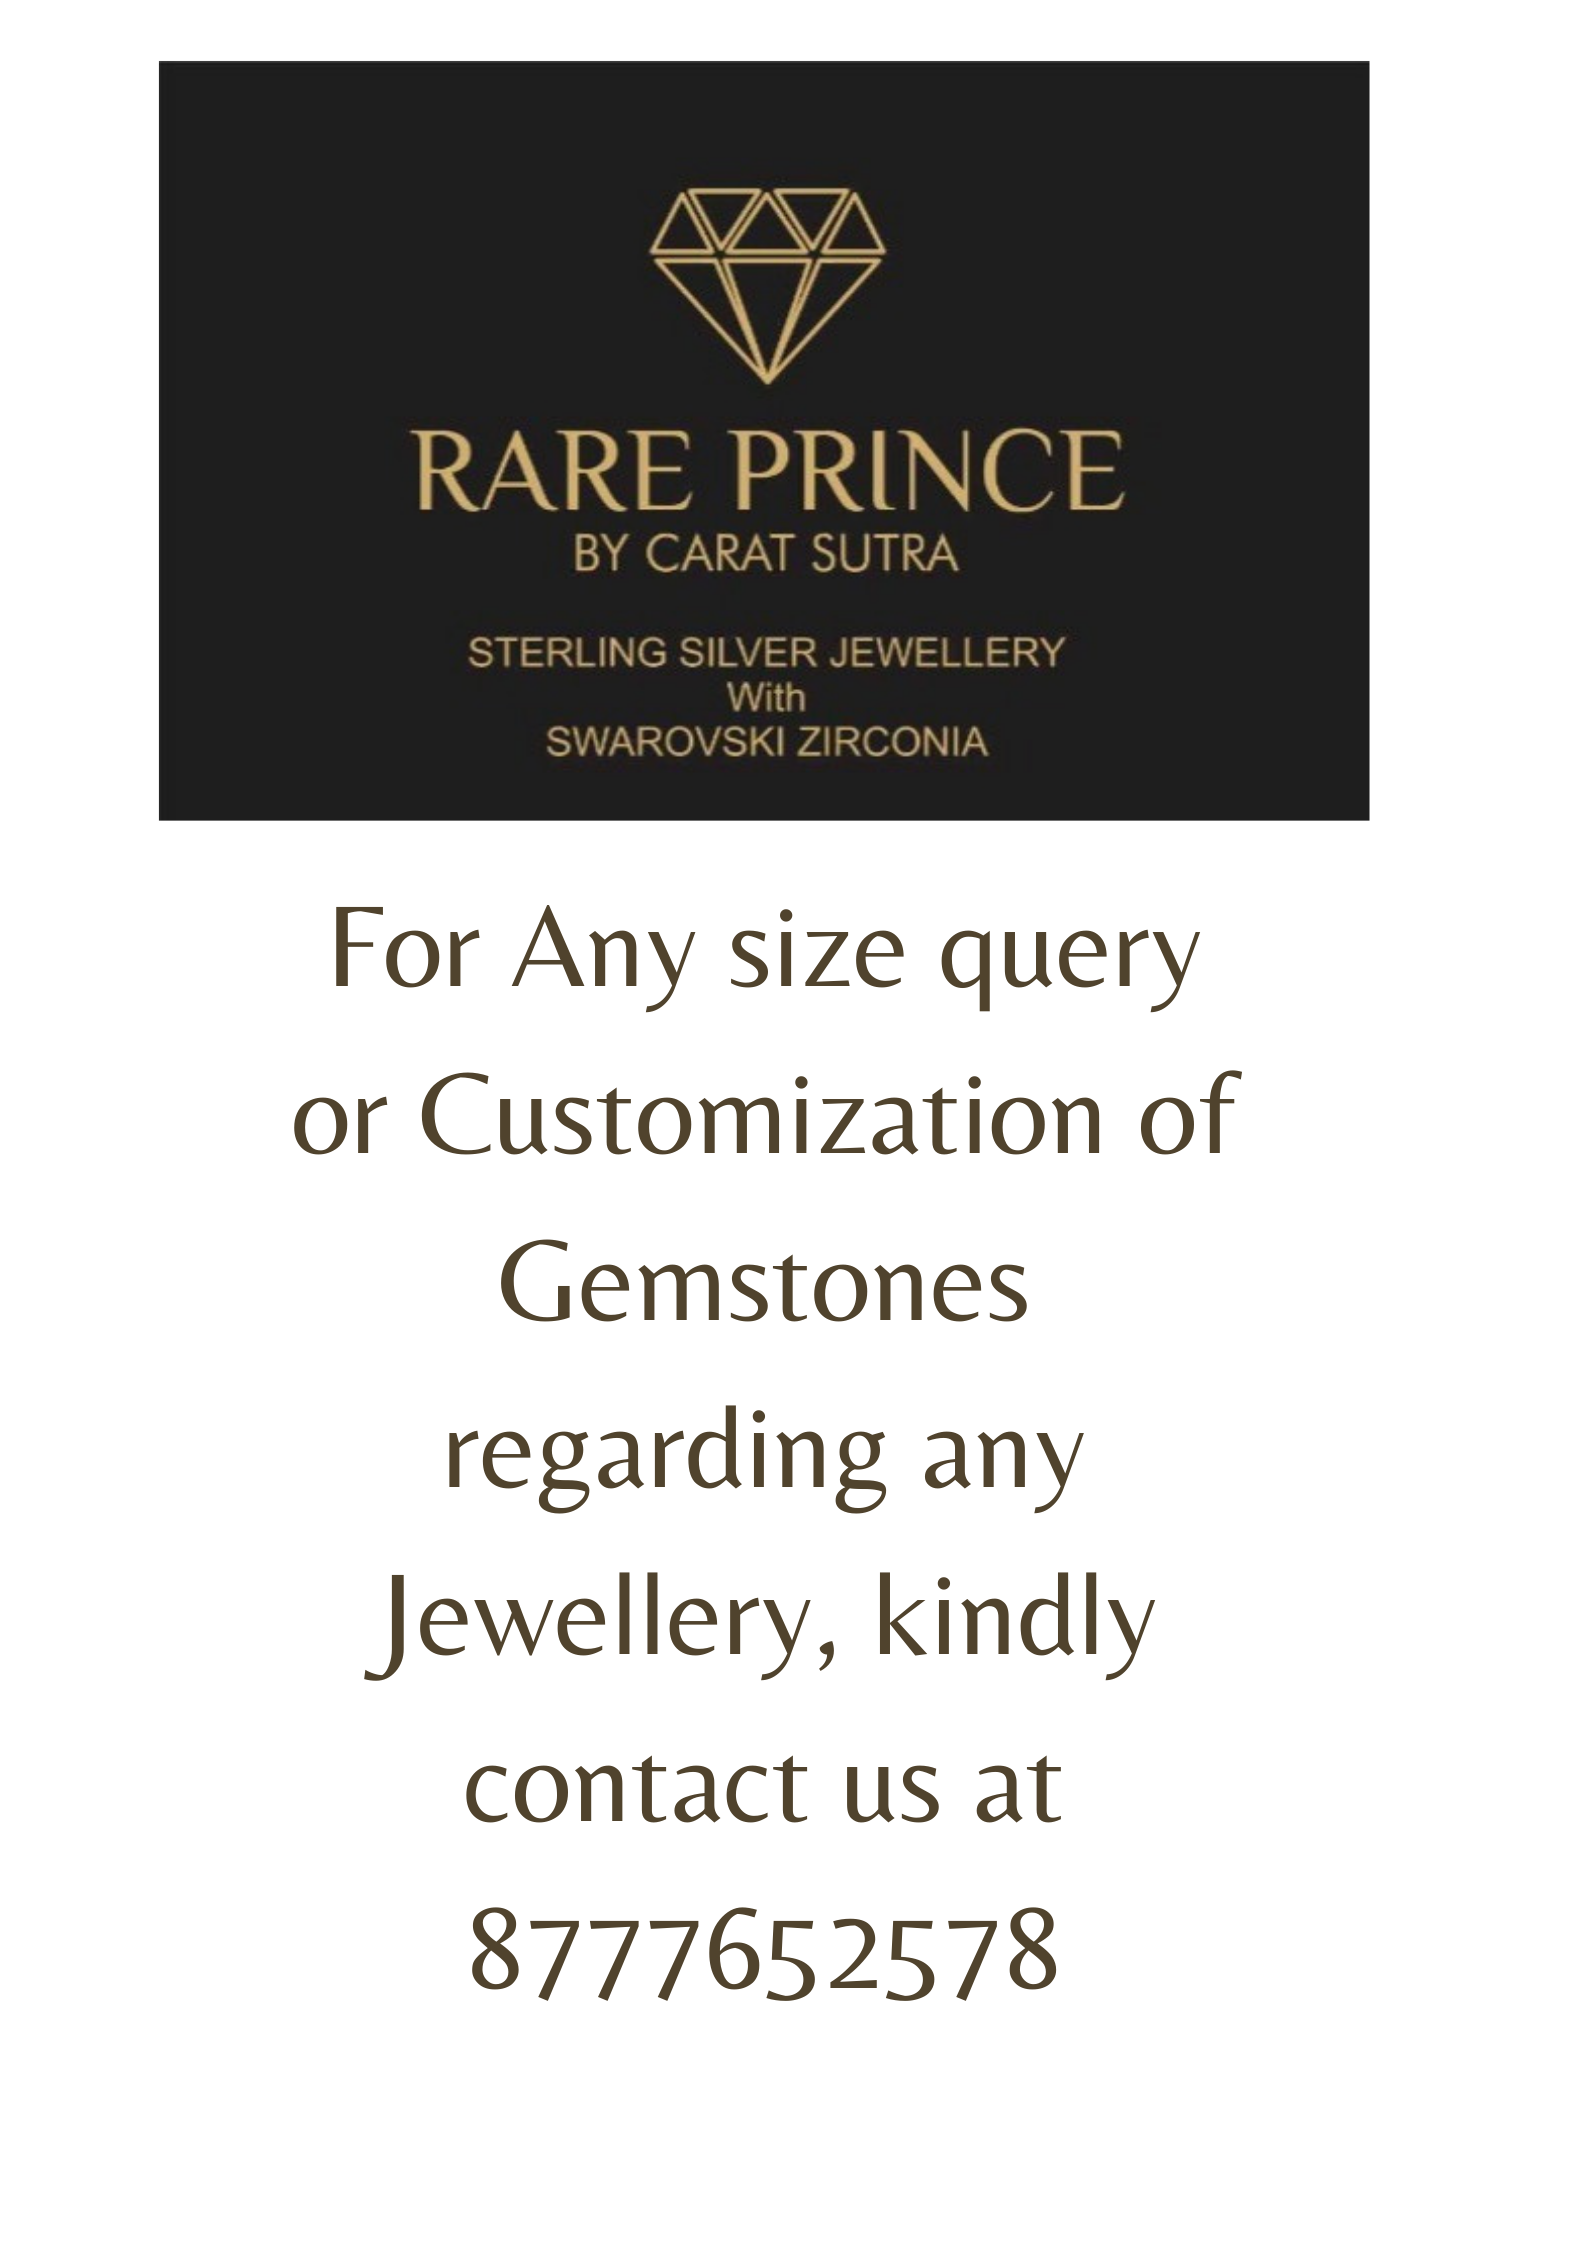 RARE PRINCE by CARAT SUTRA | Unique Greek Gucci Pattern Pendant Adorned with Cubic Zircons for Men | 925 Sterling Silver Oxidized Pendant | Men's Jewelry | With Certificate of Authenticity and 925 Hallmark - caratsutra